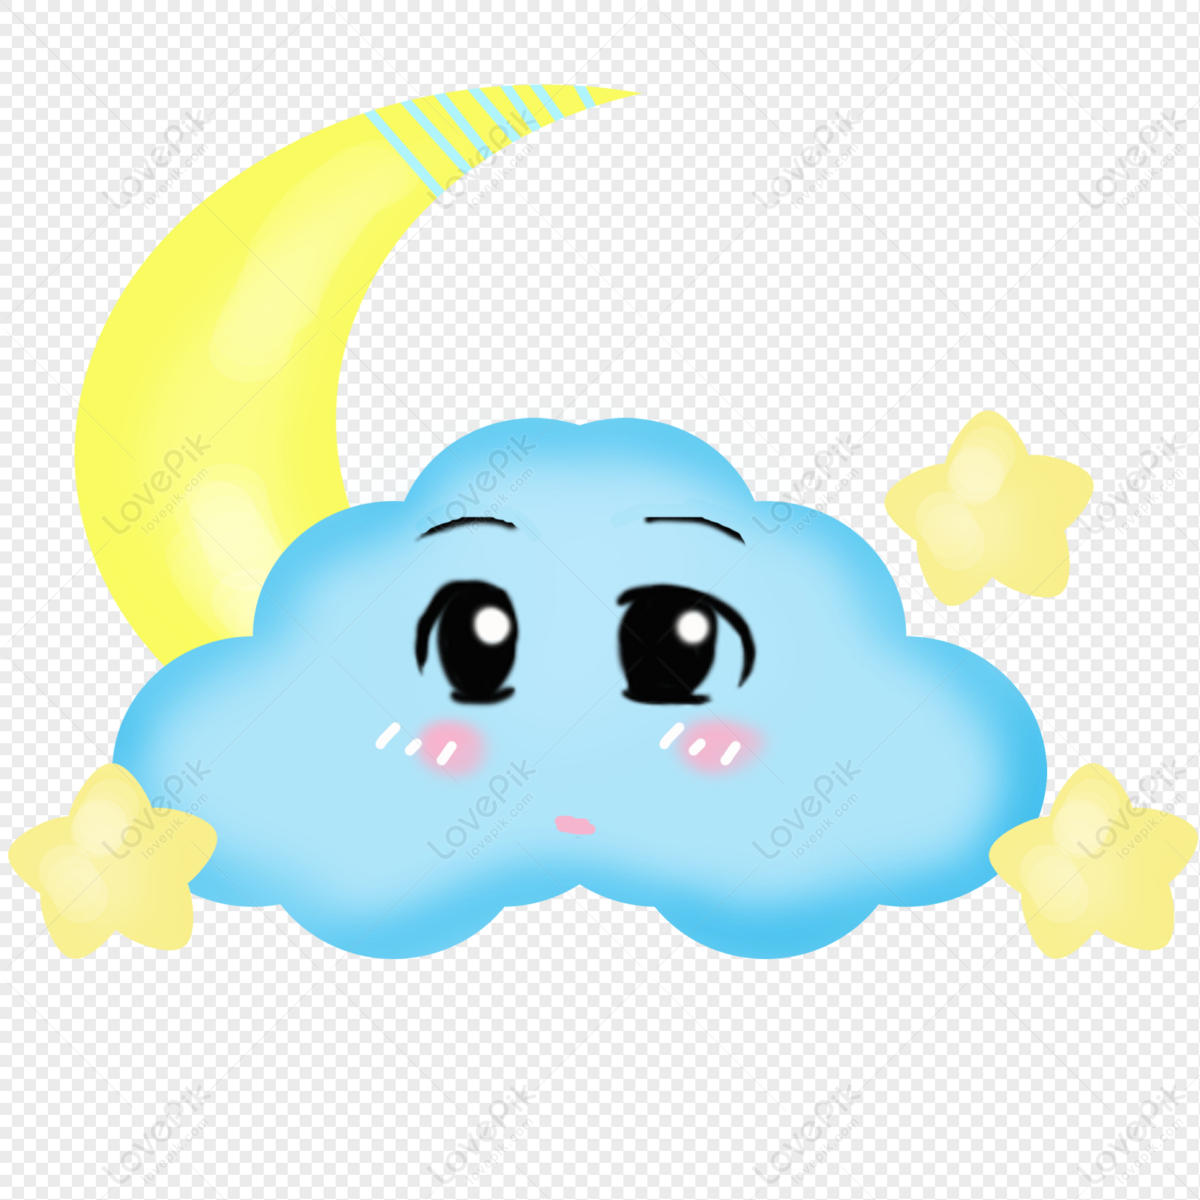 Cartoon Cloud PNG Transparent And Clipart Image For Free Download - Lovepik  | 401039976